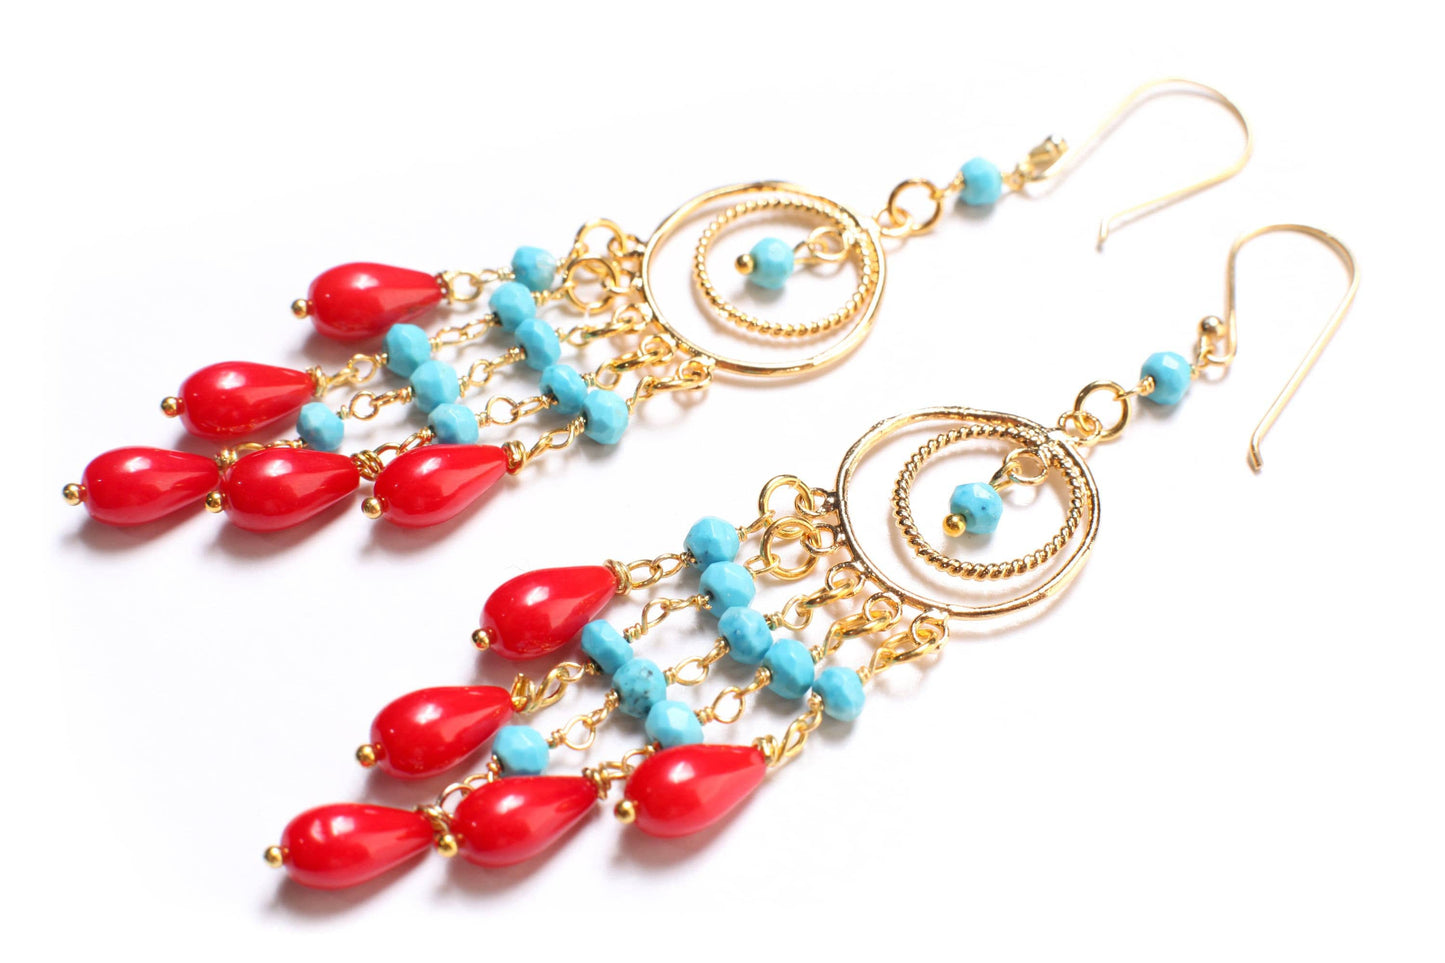 Natural Coral Briolette Earrings 5x9mm Wire Wrapped Faceted Turquoise Chandelier earrings in Gold Vermeil or Sterling Silver EarWire, Gift